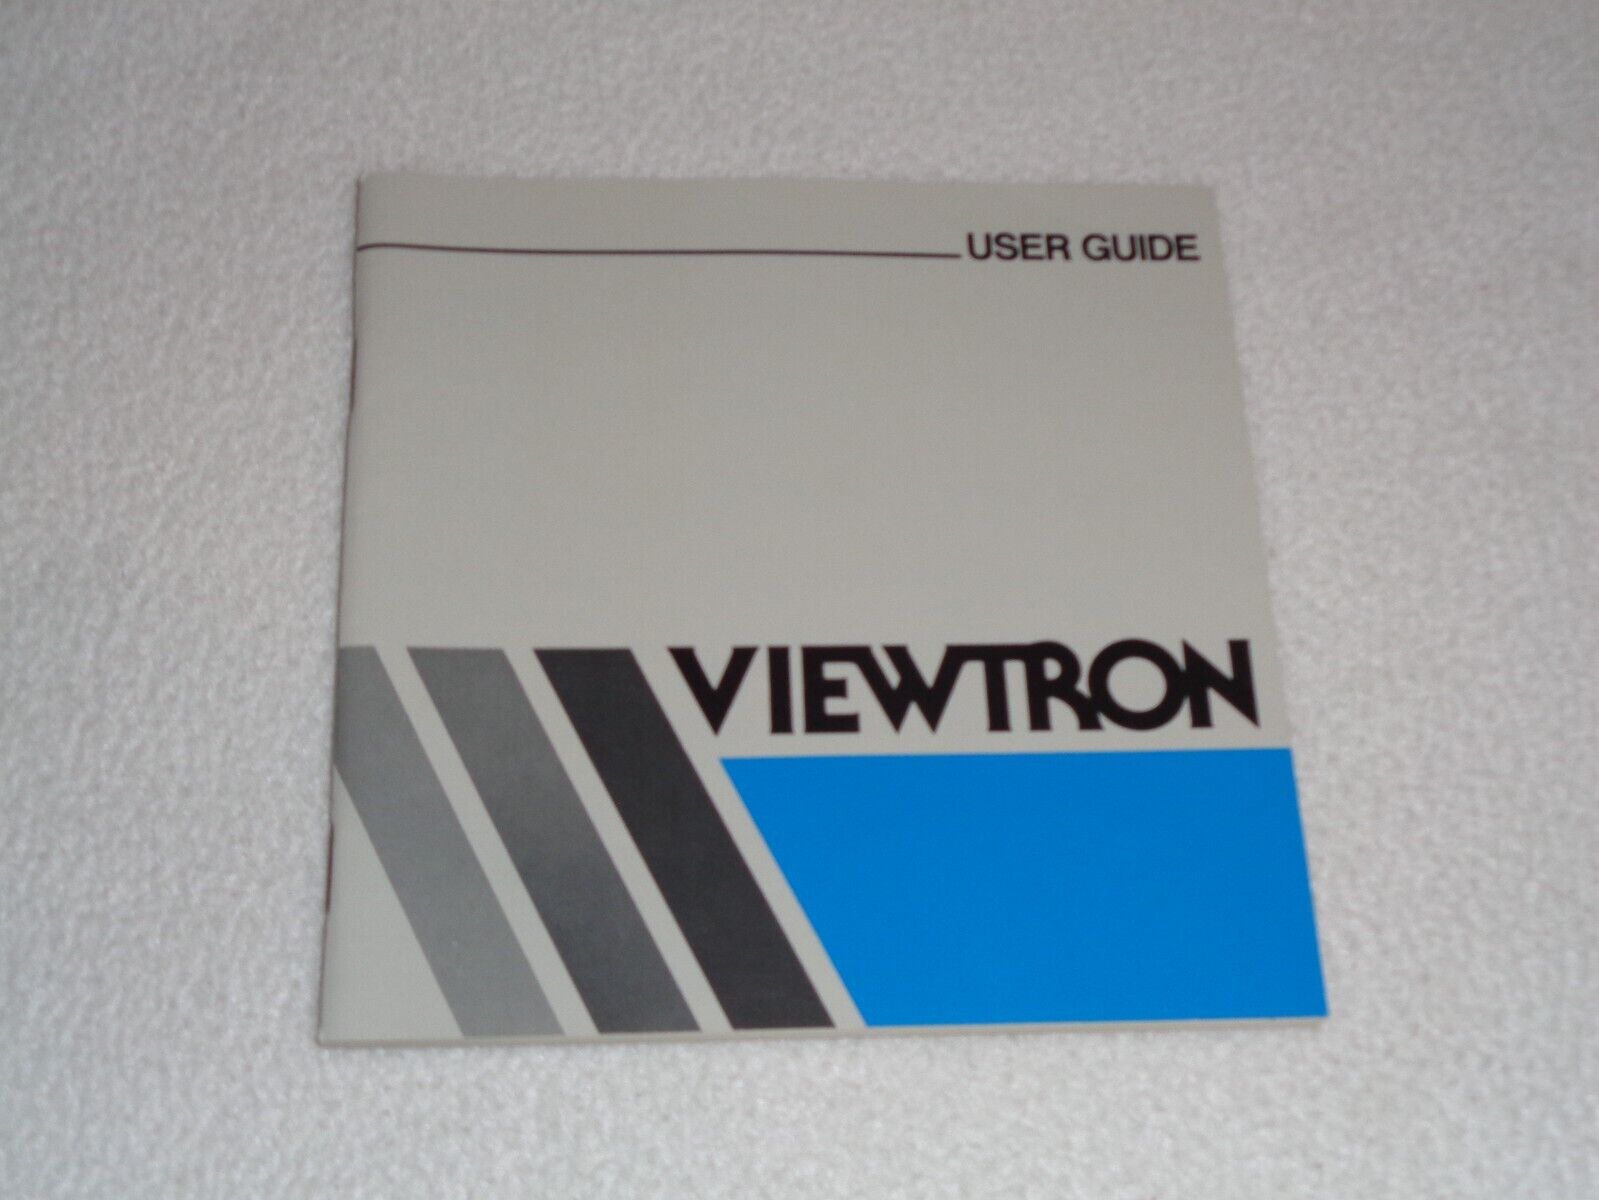 Viewtron Commodore 64 Computers Vintage 1985 Rare User Guide